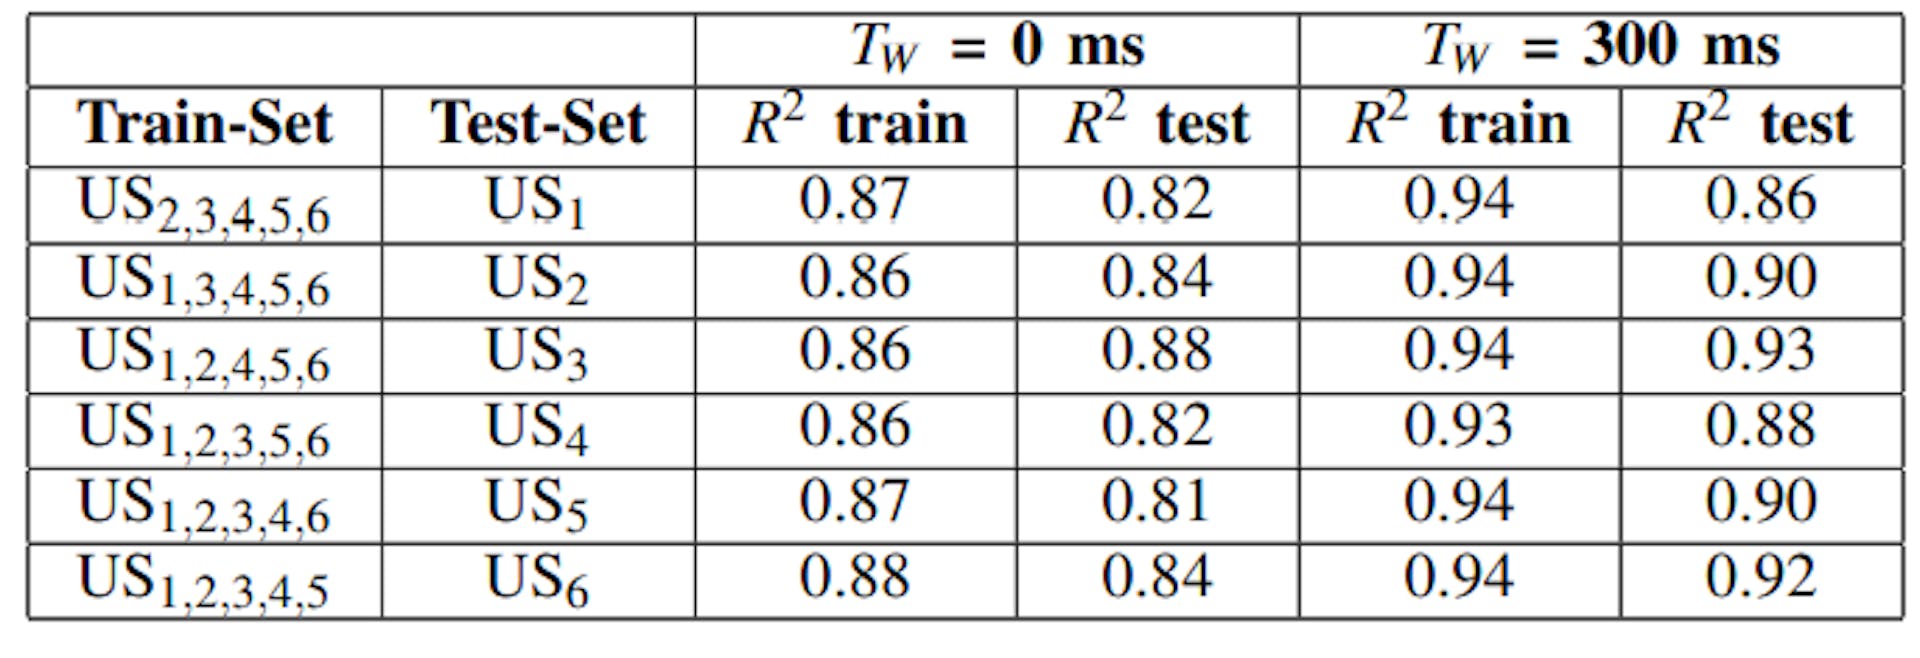 TABLE I: Prediction accuracy for the LSTM model (R2 for training and testing set) with time window of 300 ms and instantaneous values. We performed a cross-user generalization evaluation by iteratively training on all users (USi) except one and testing on the excluded user.